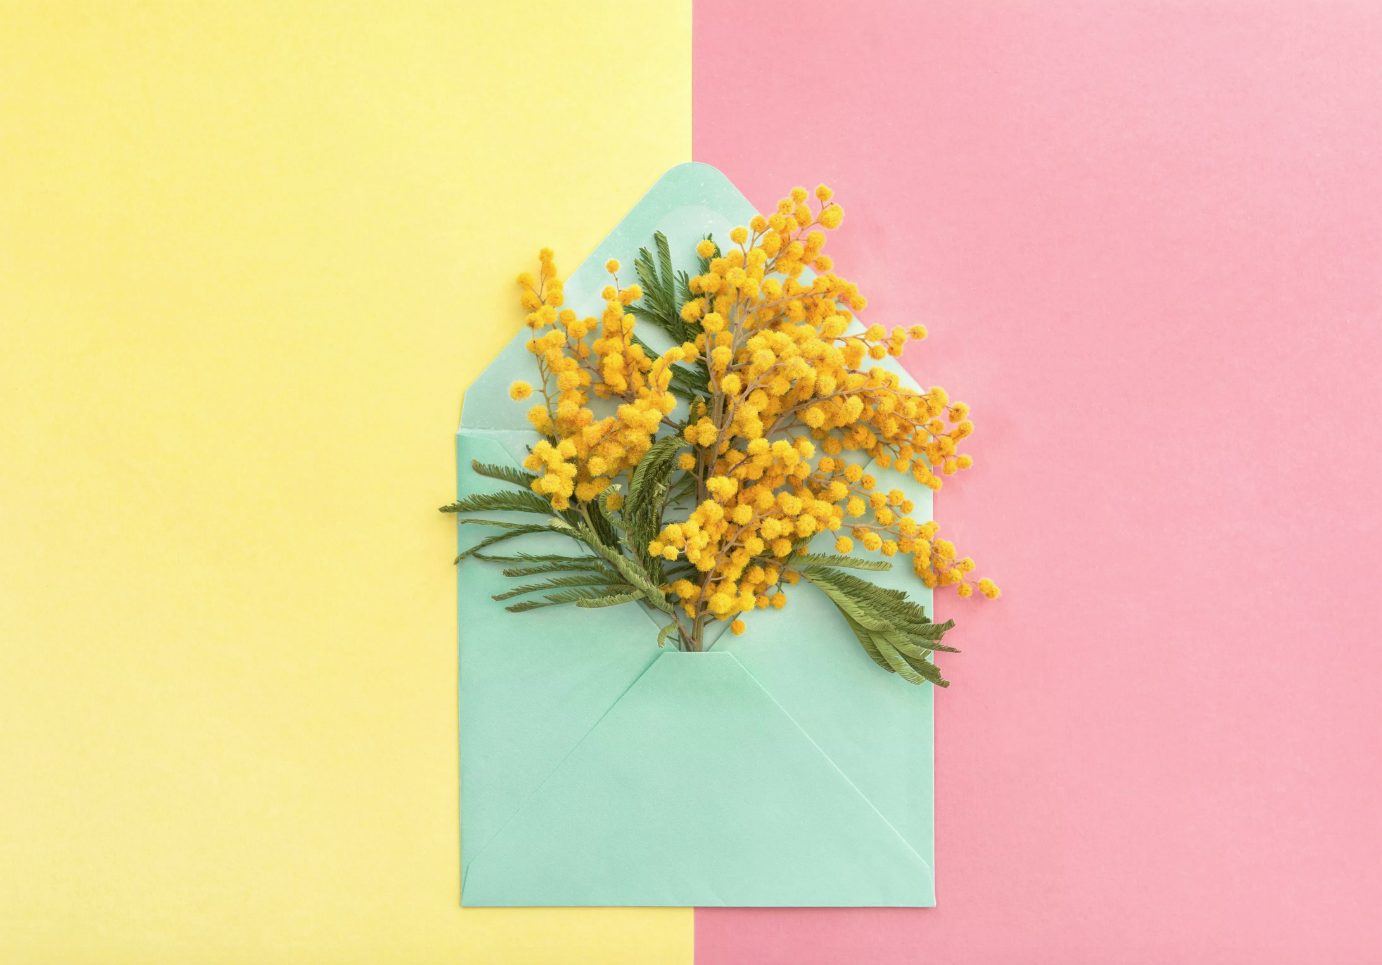 Colorful envelope with flowers inside